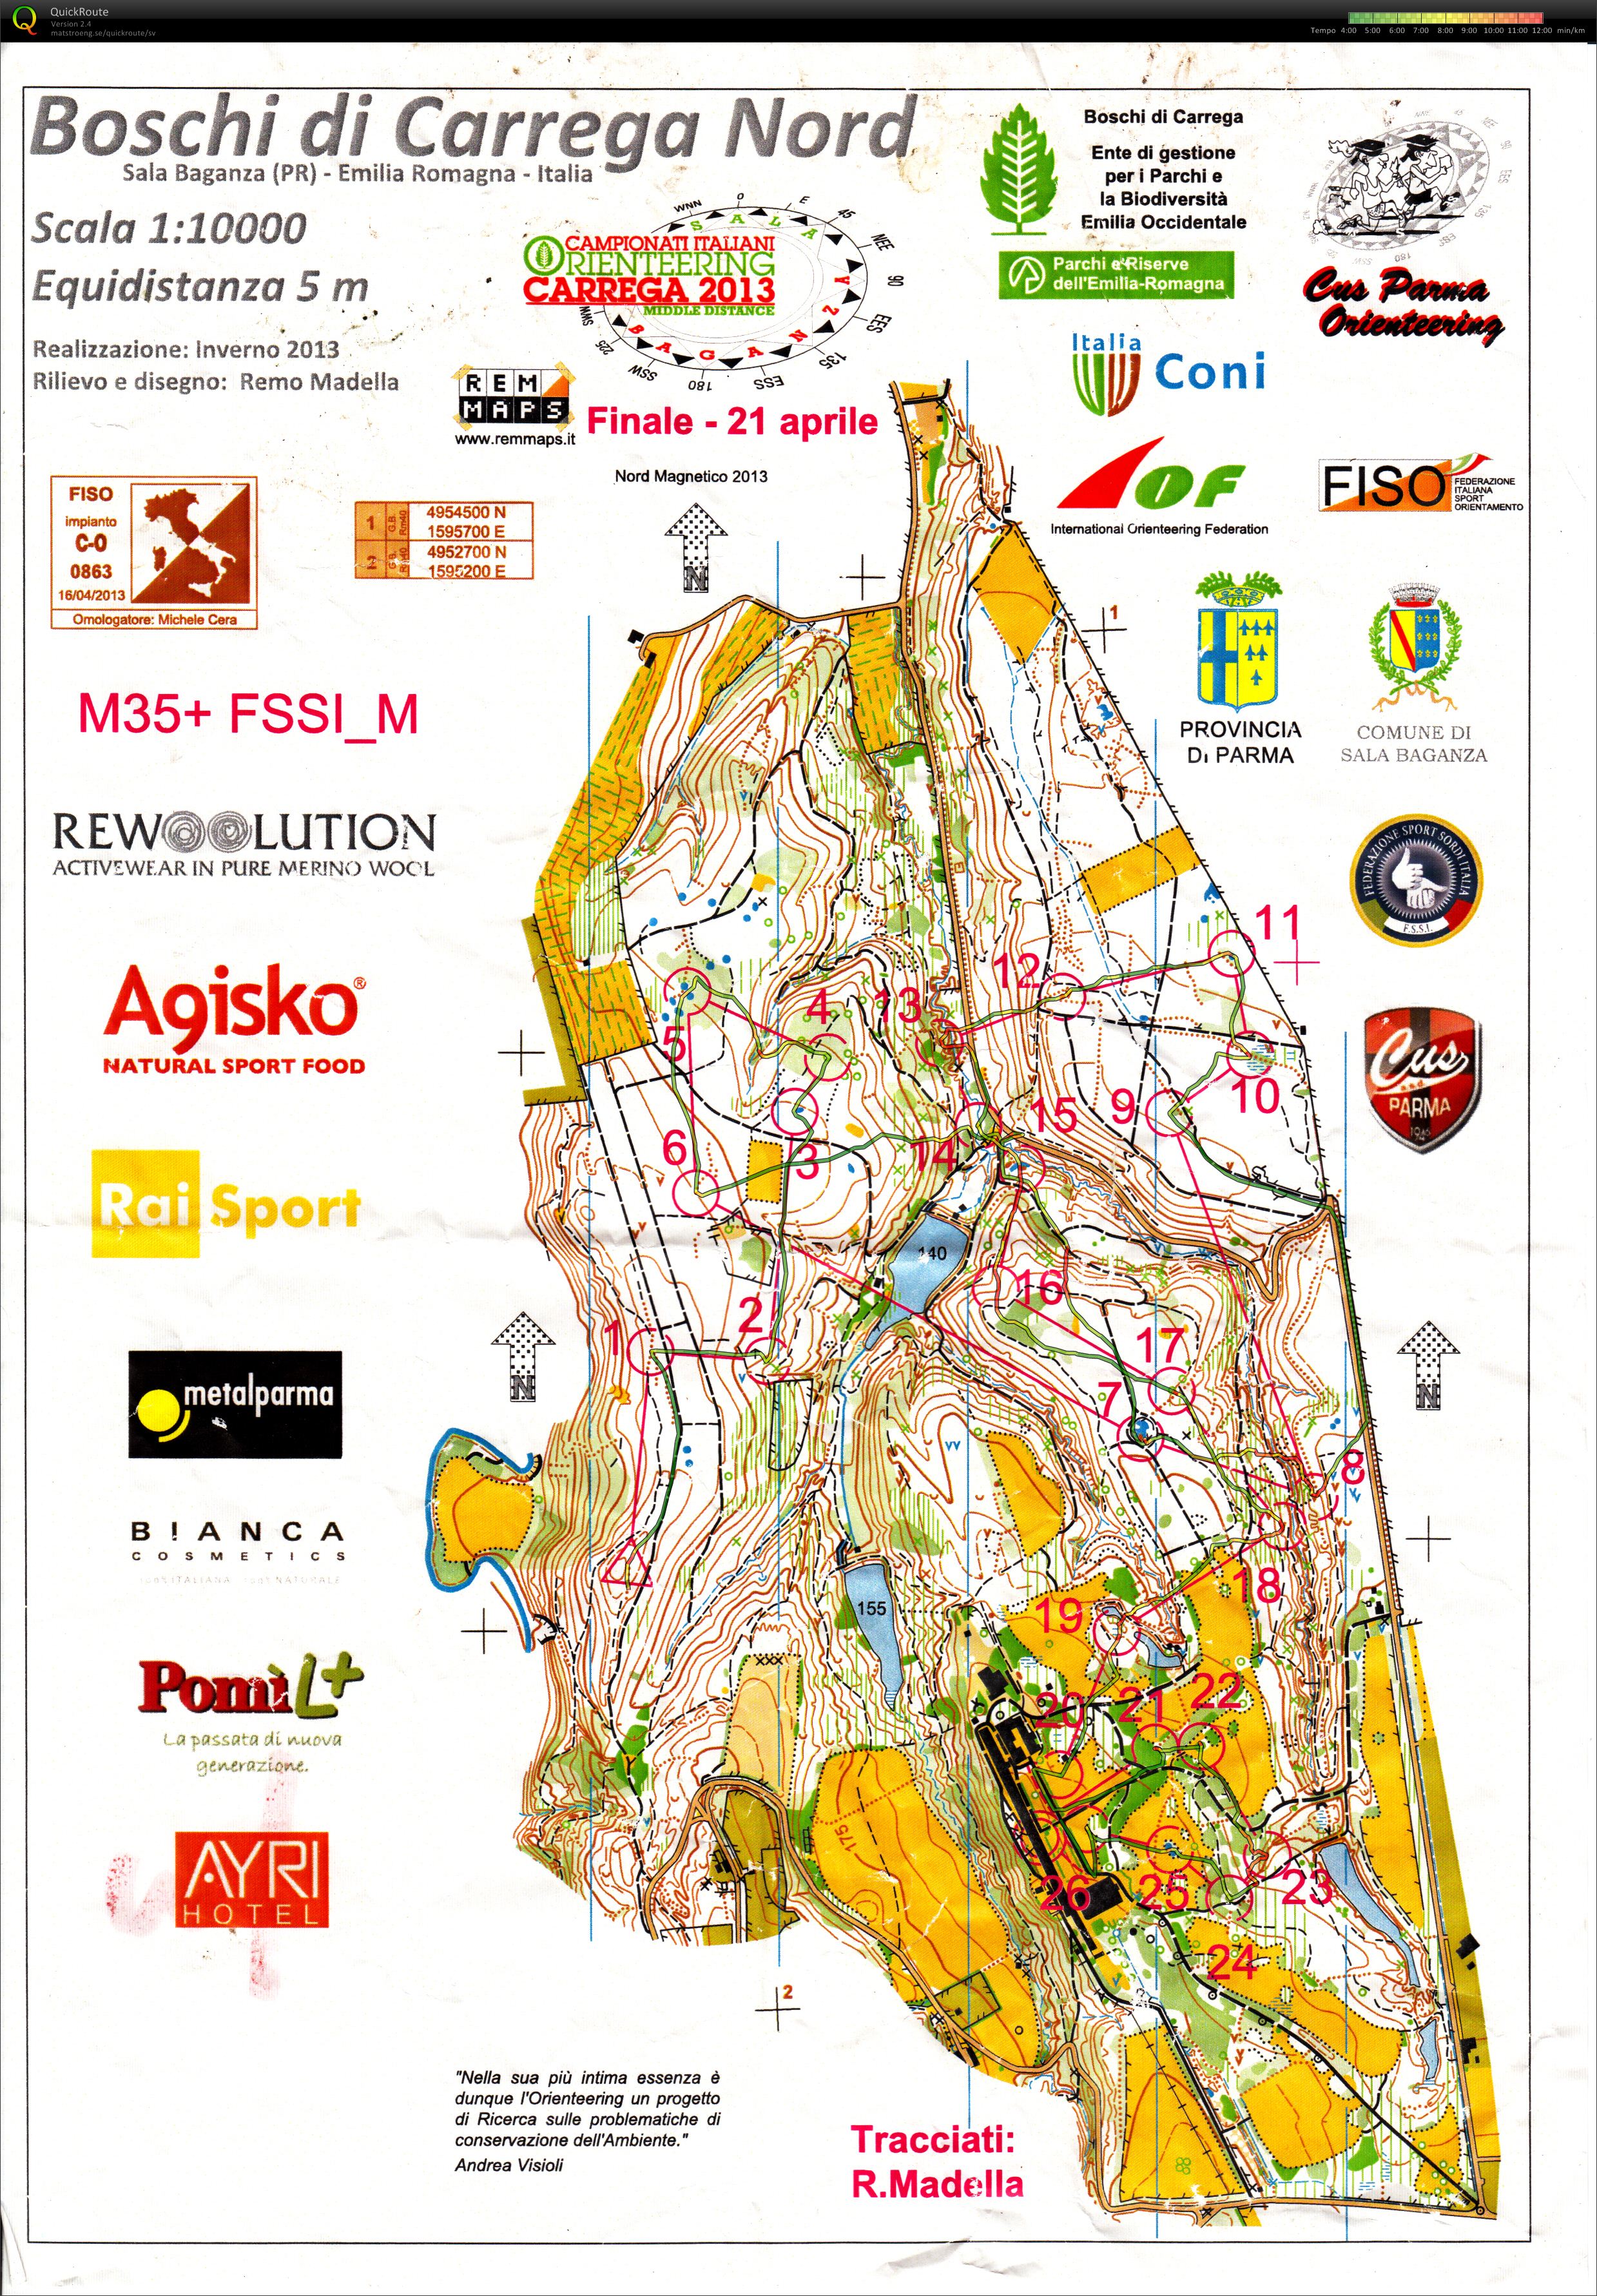 Italian Championship Middle Distance Final (21.04.2013)